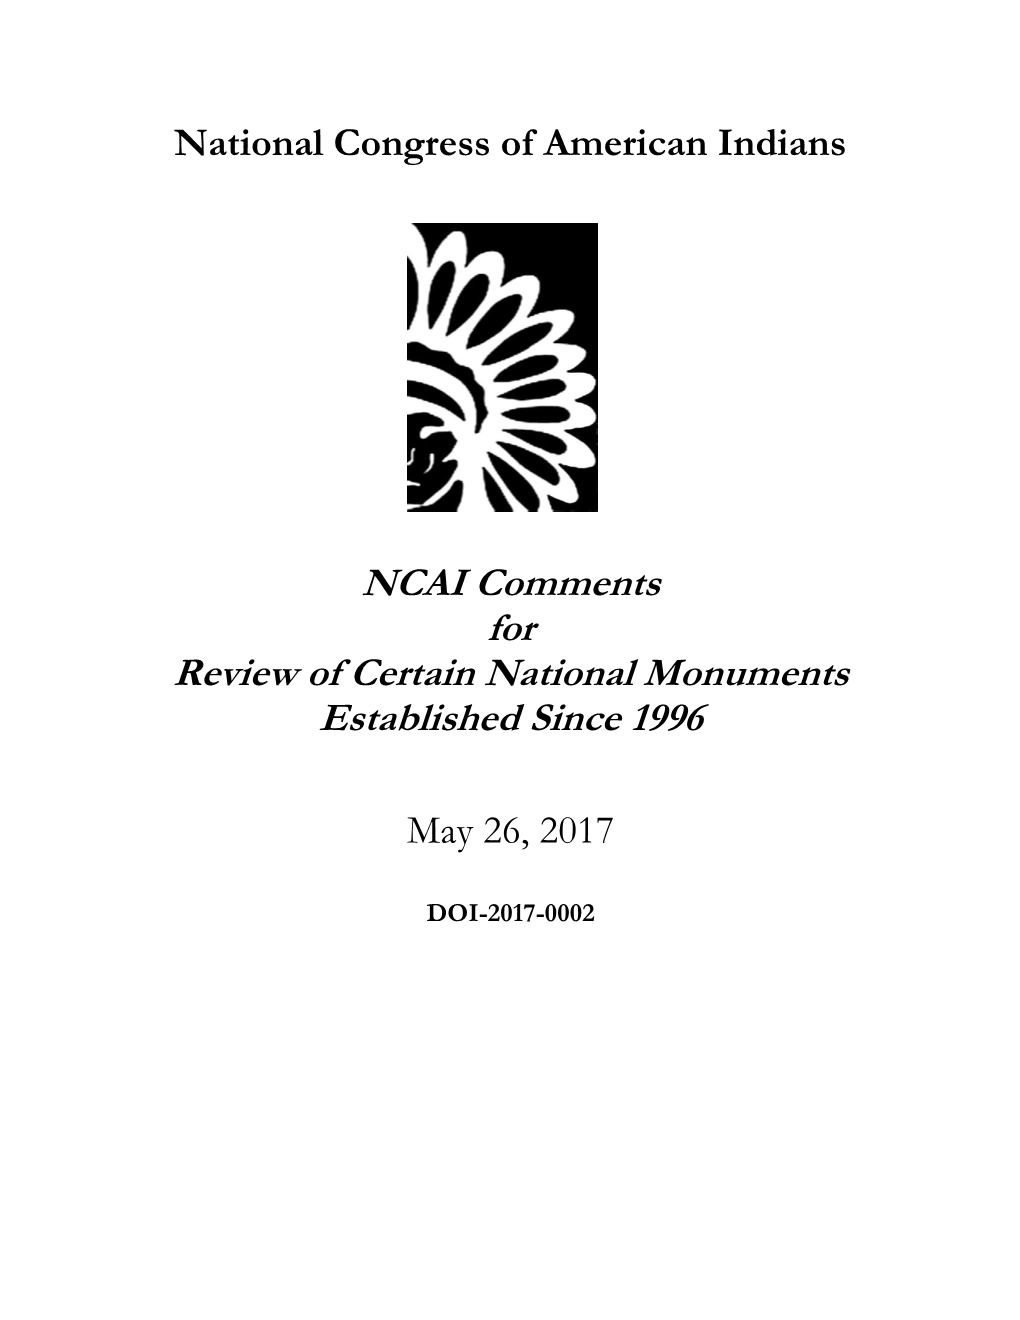 NCAI Comments for Review of Certain National Monuments Established Since 1996